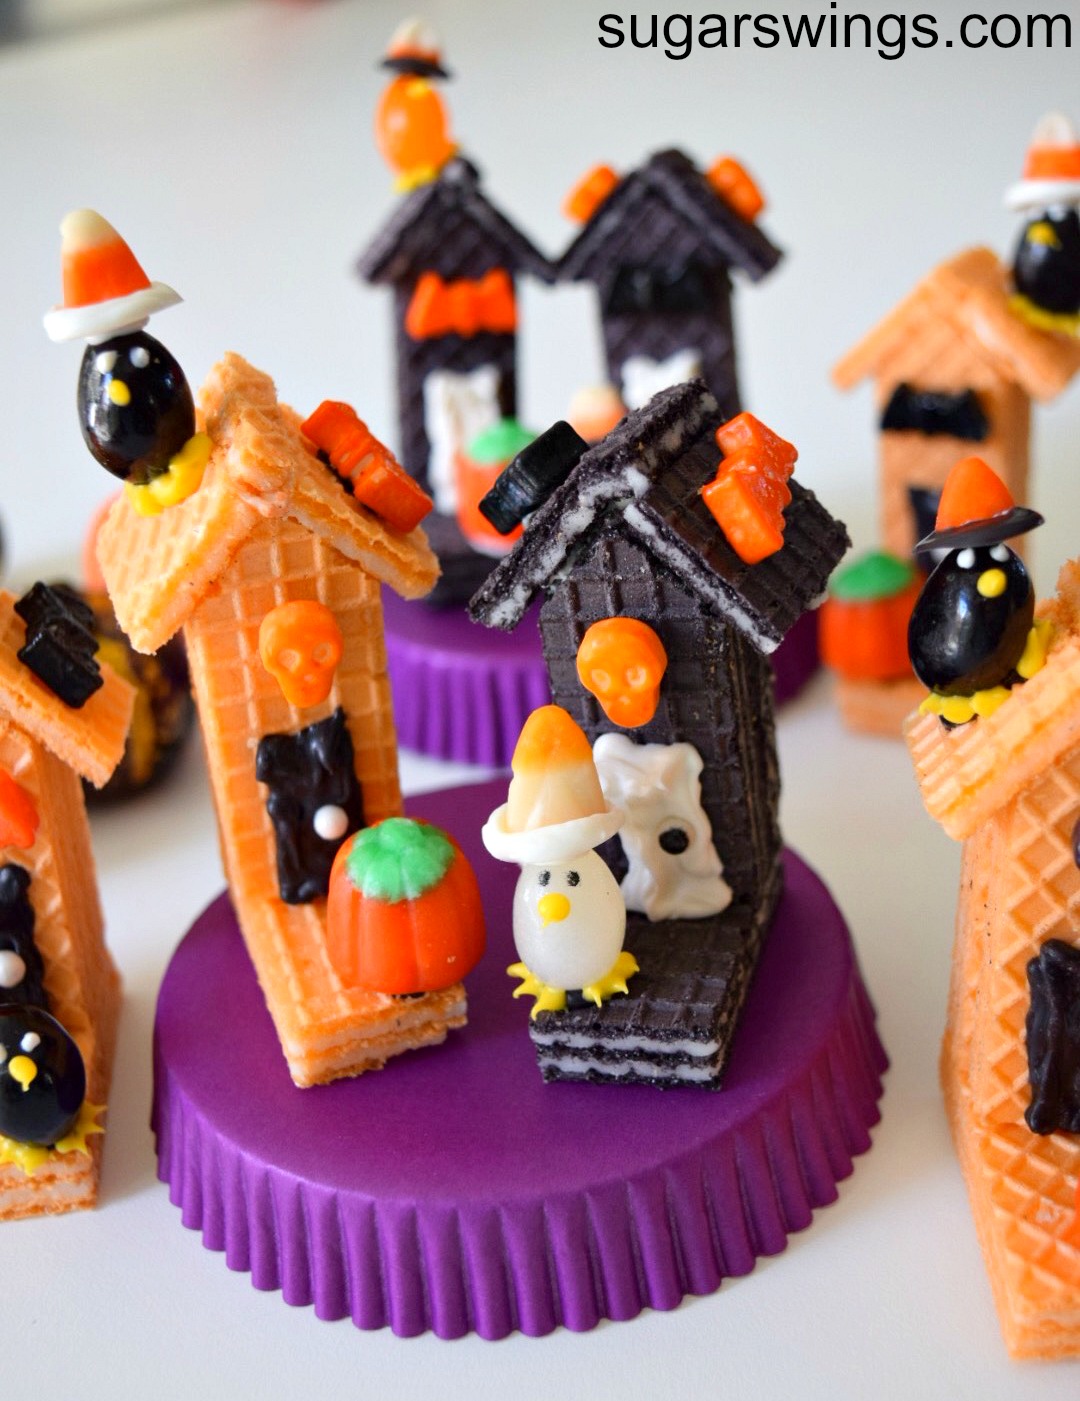 Sugar Swings! Serve Some: Coffin and Skeleton Mini Cakes